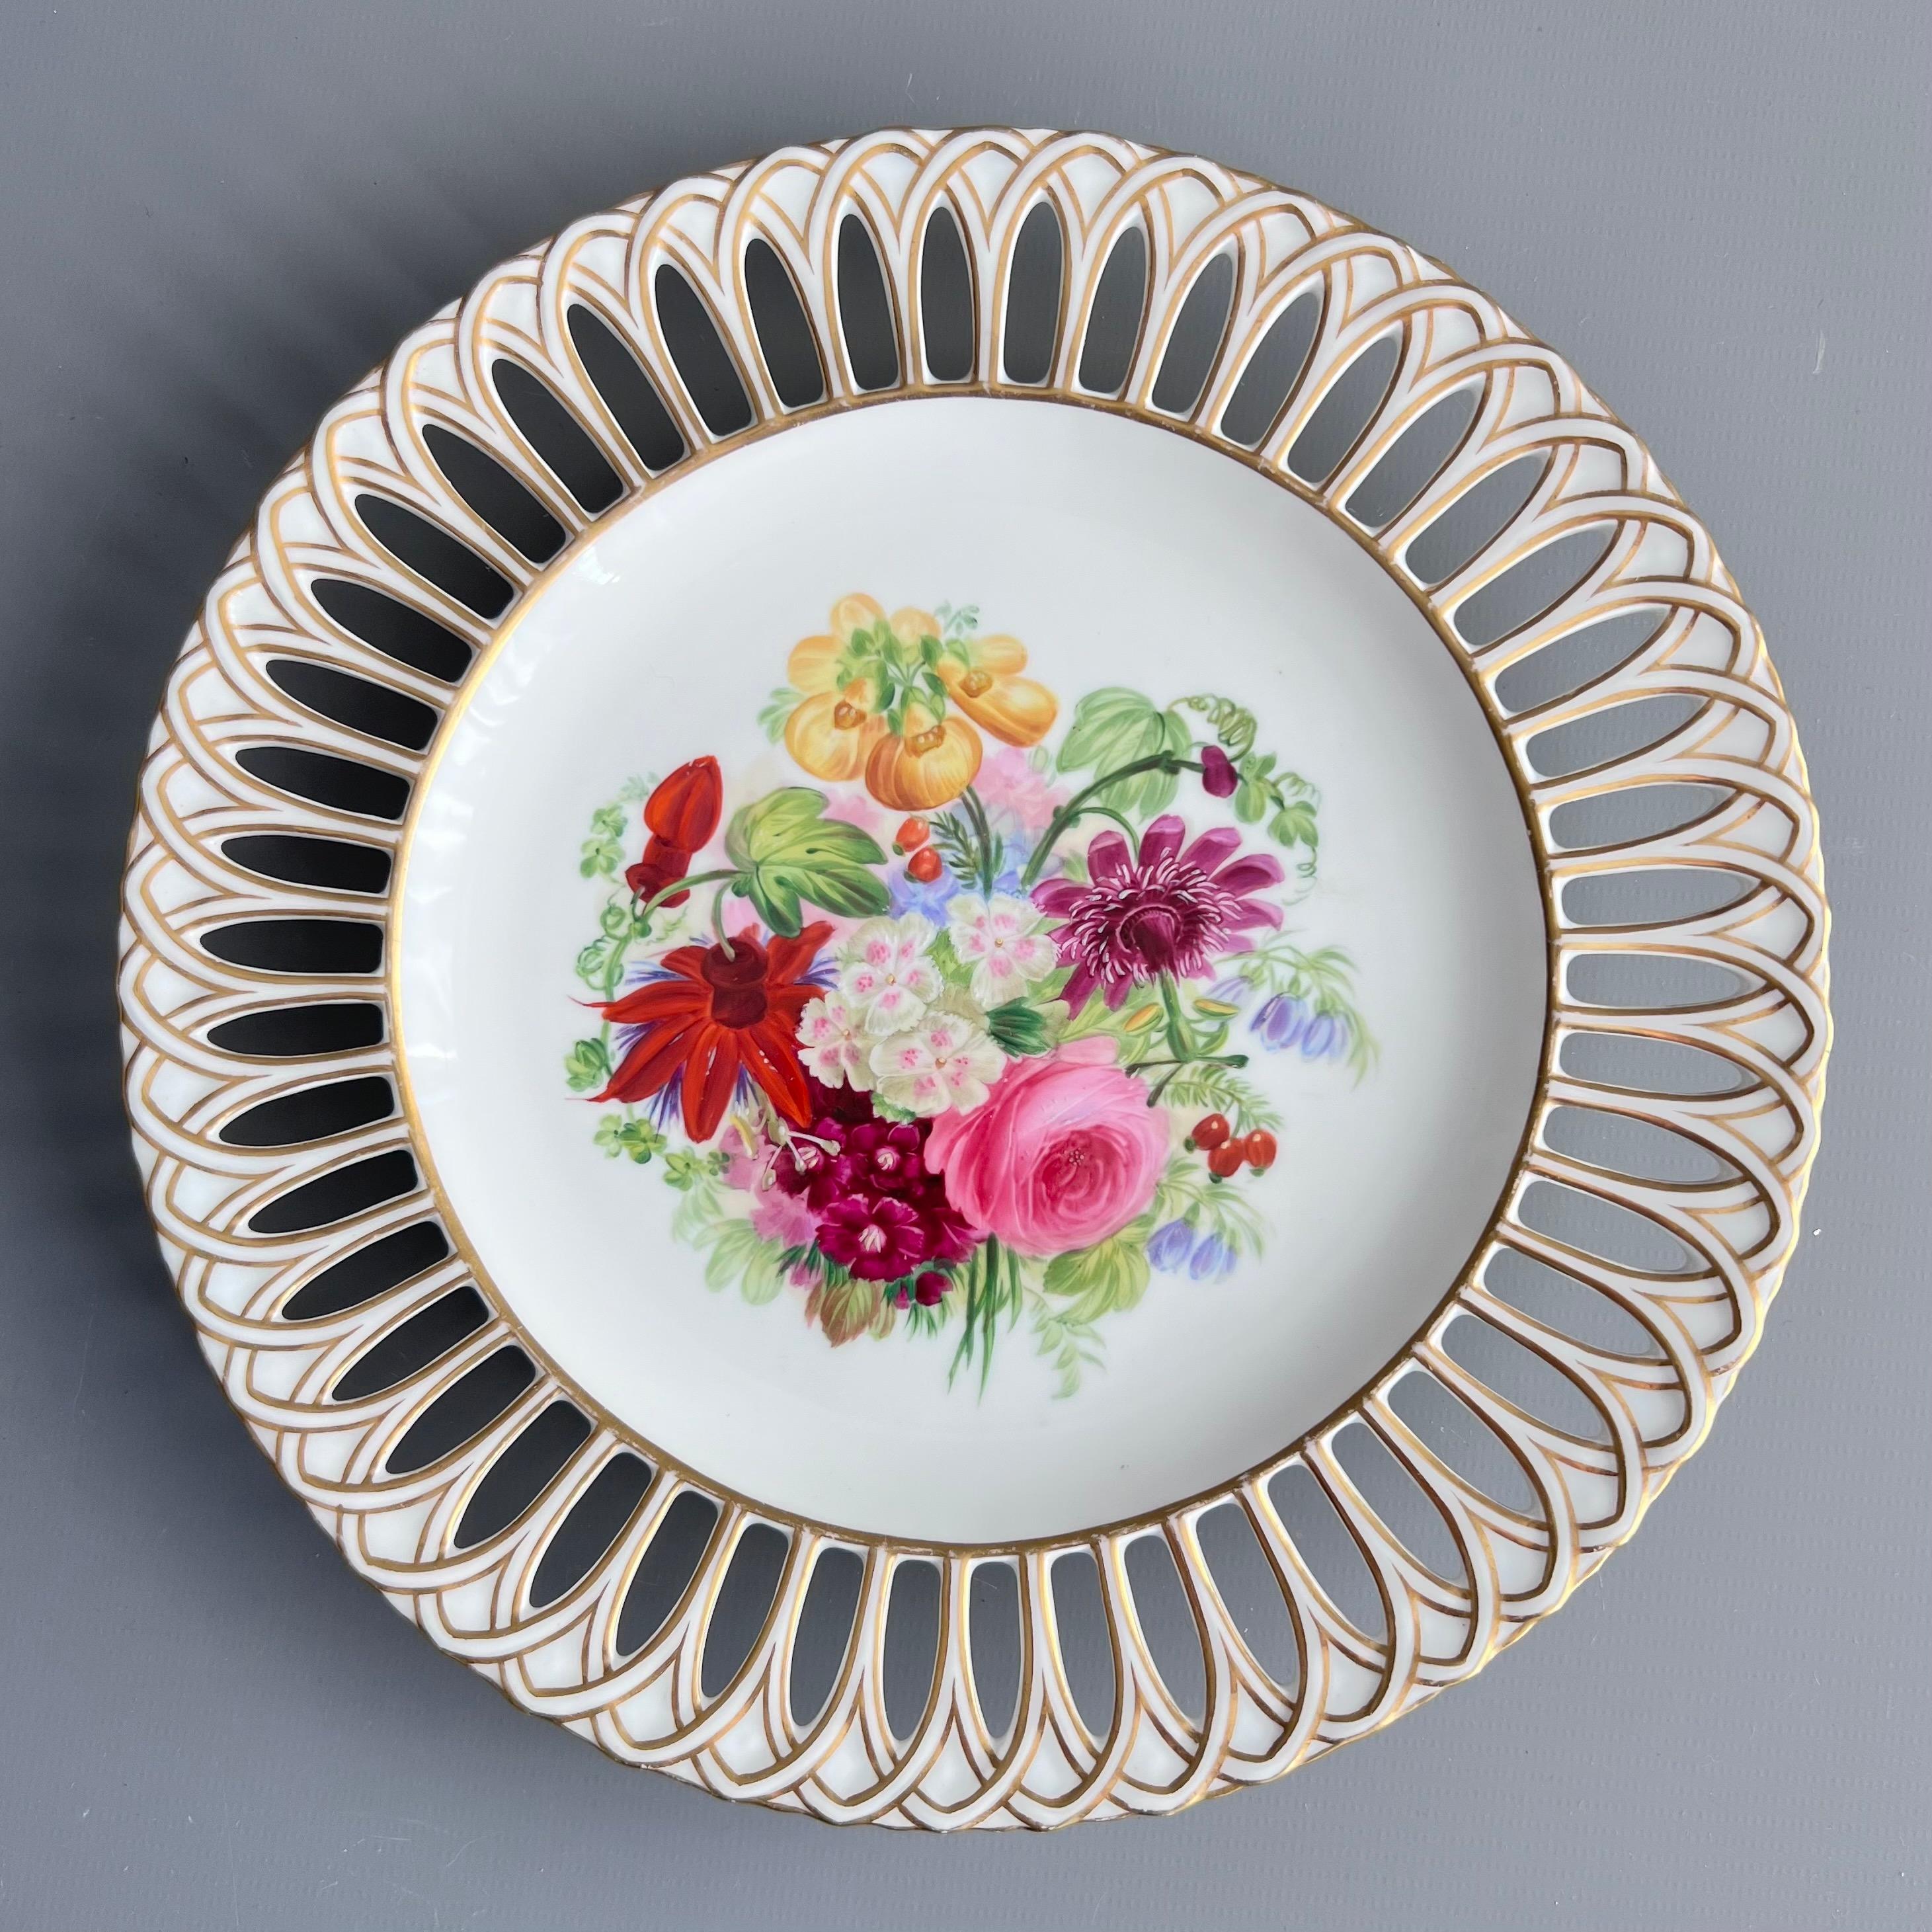 Copeland Set of 8 plates, Reticulated, Sublime Flowers by Greatbatch, 1848 For Sale 9